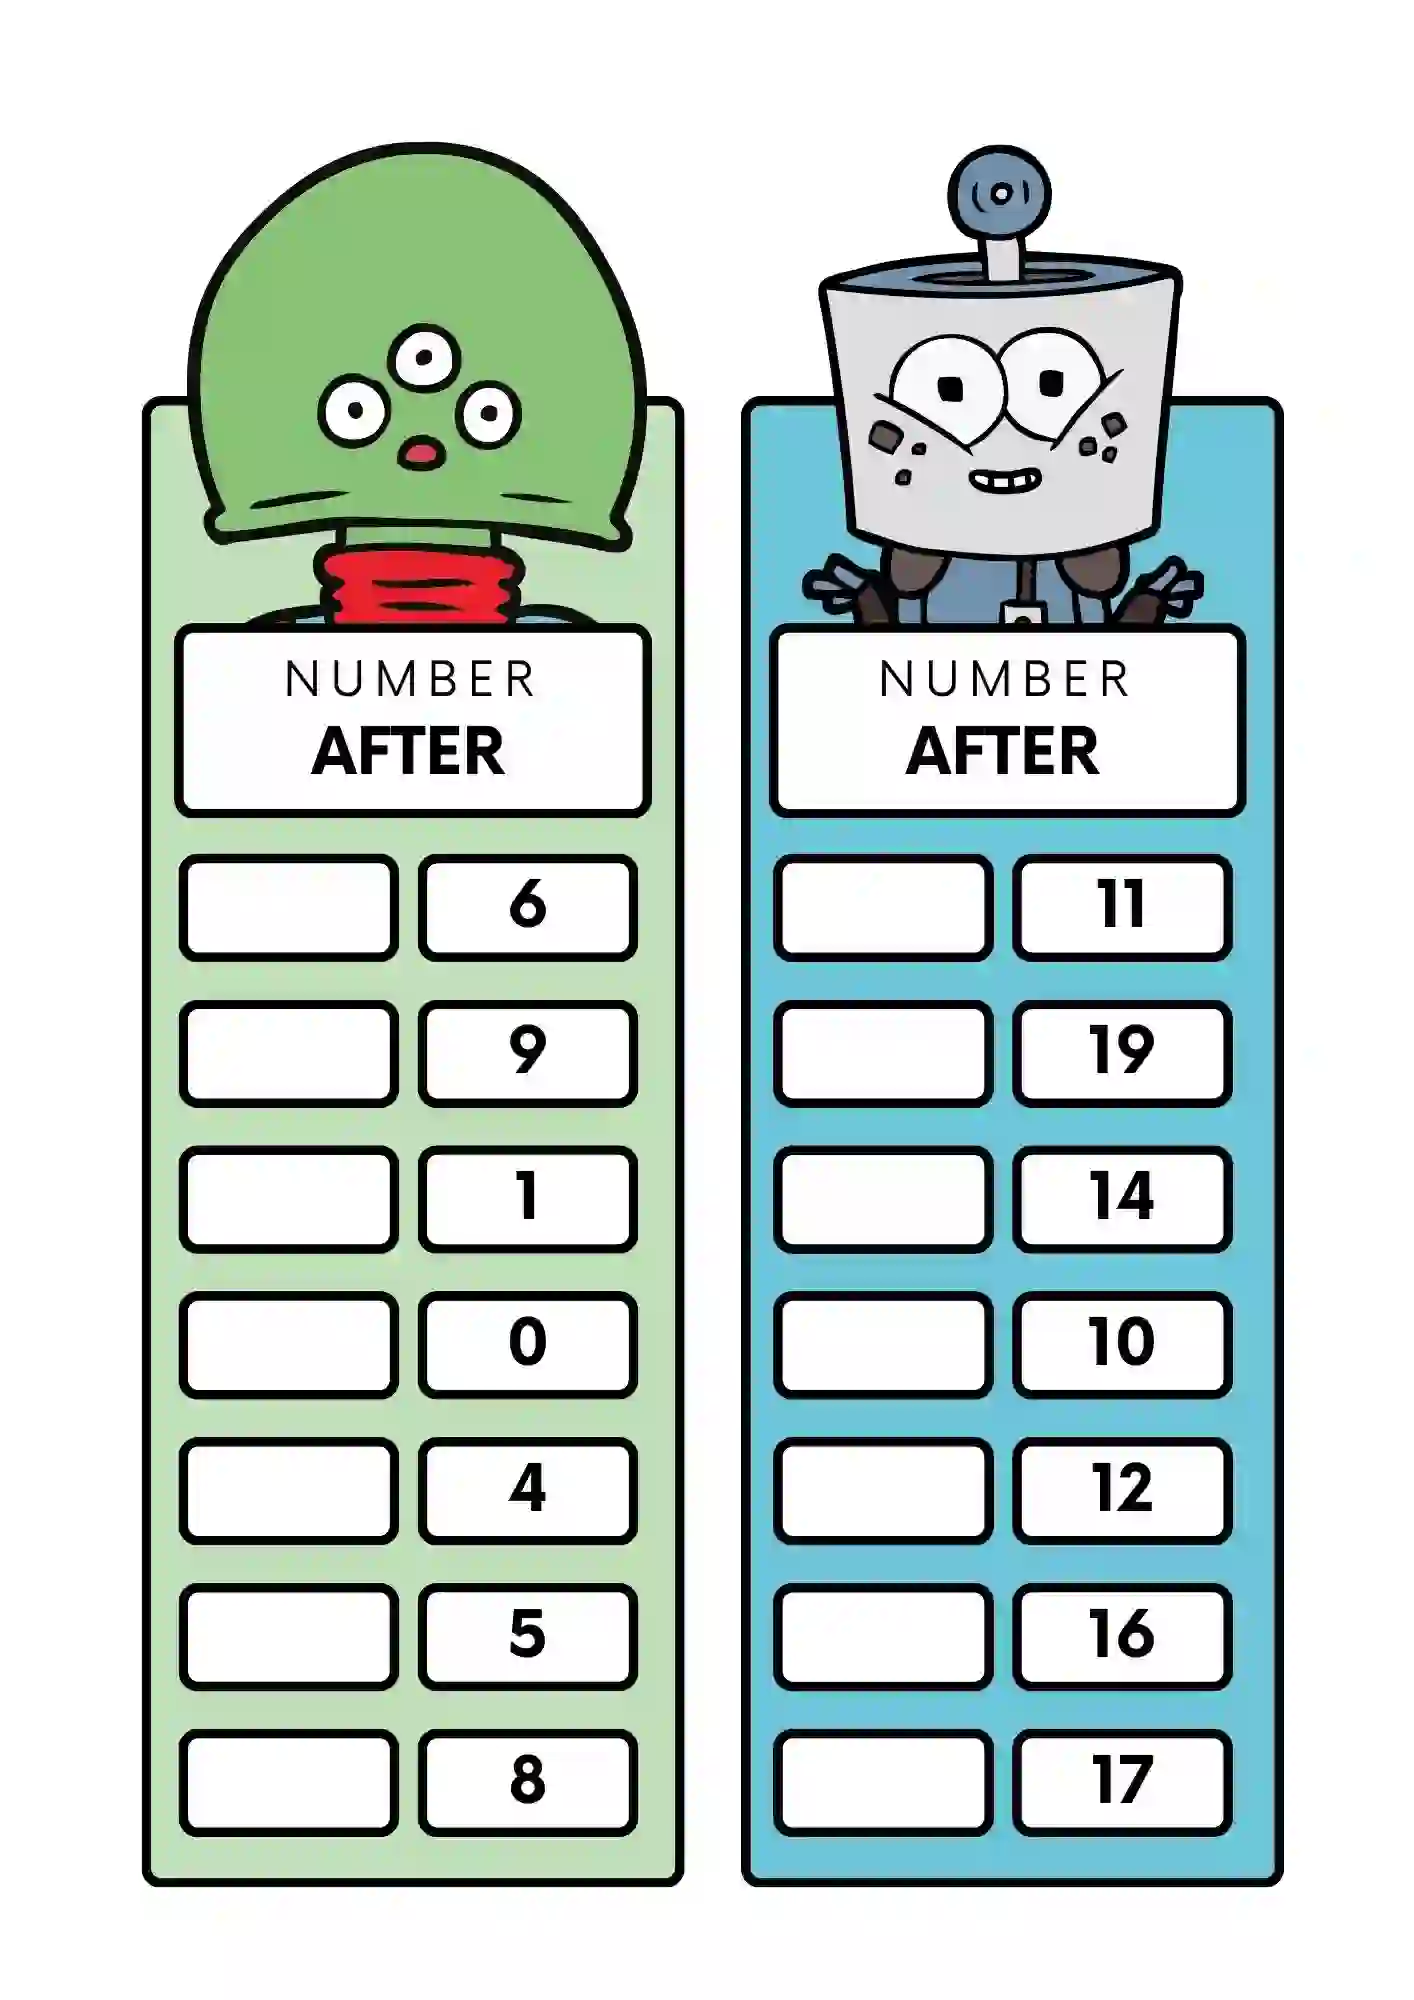 Number Before and After Worksheets (NUMBER 1 TO 20)